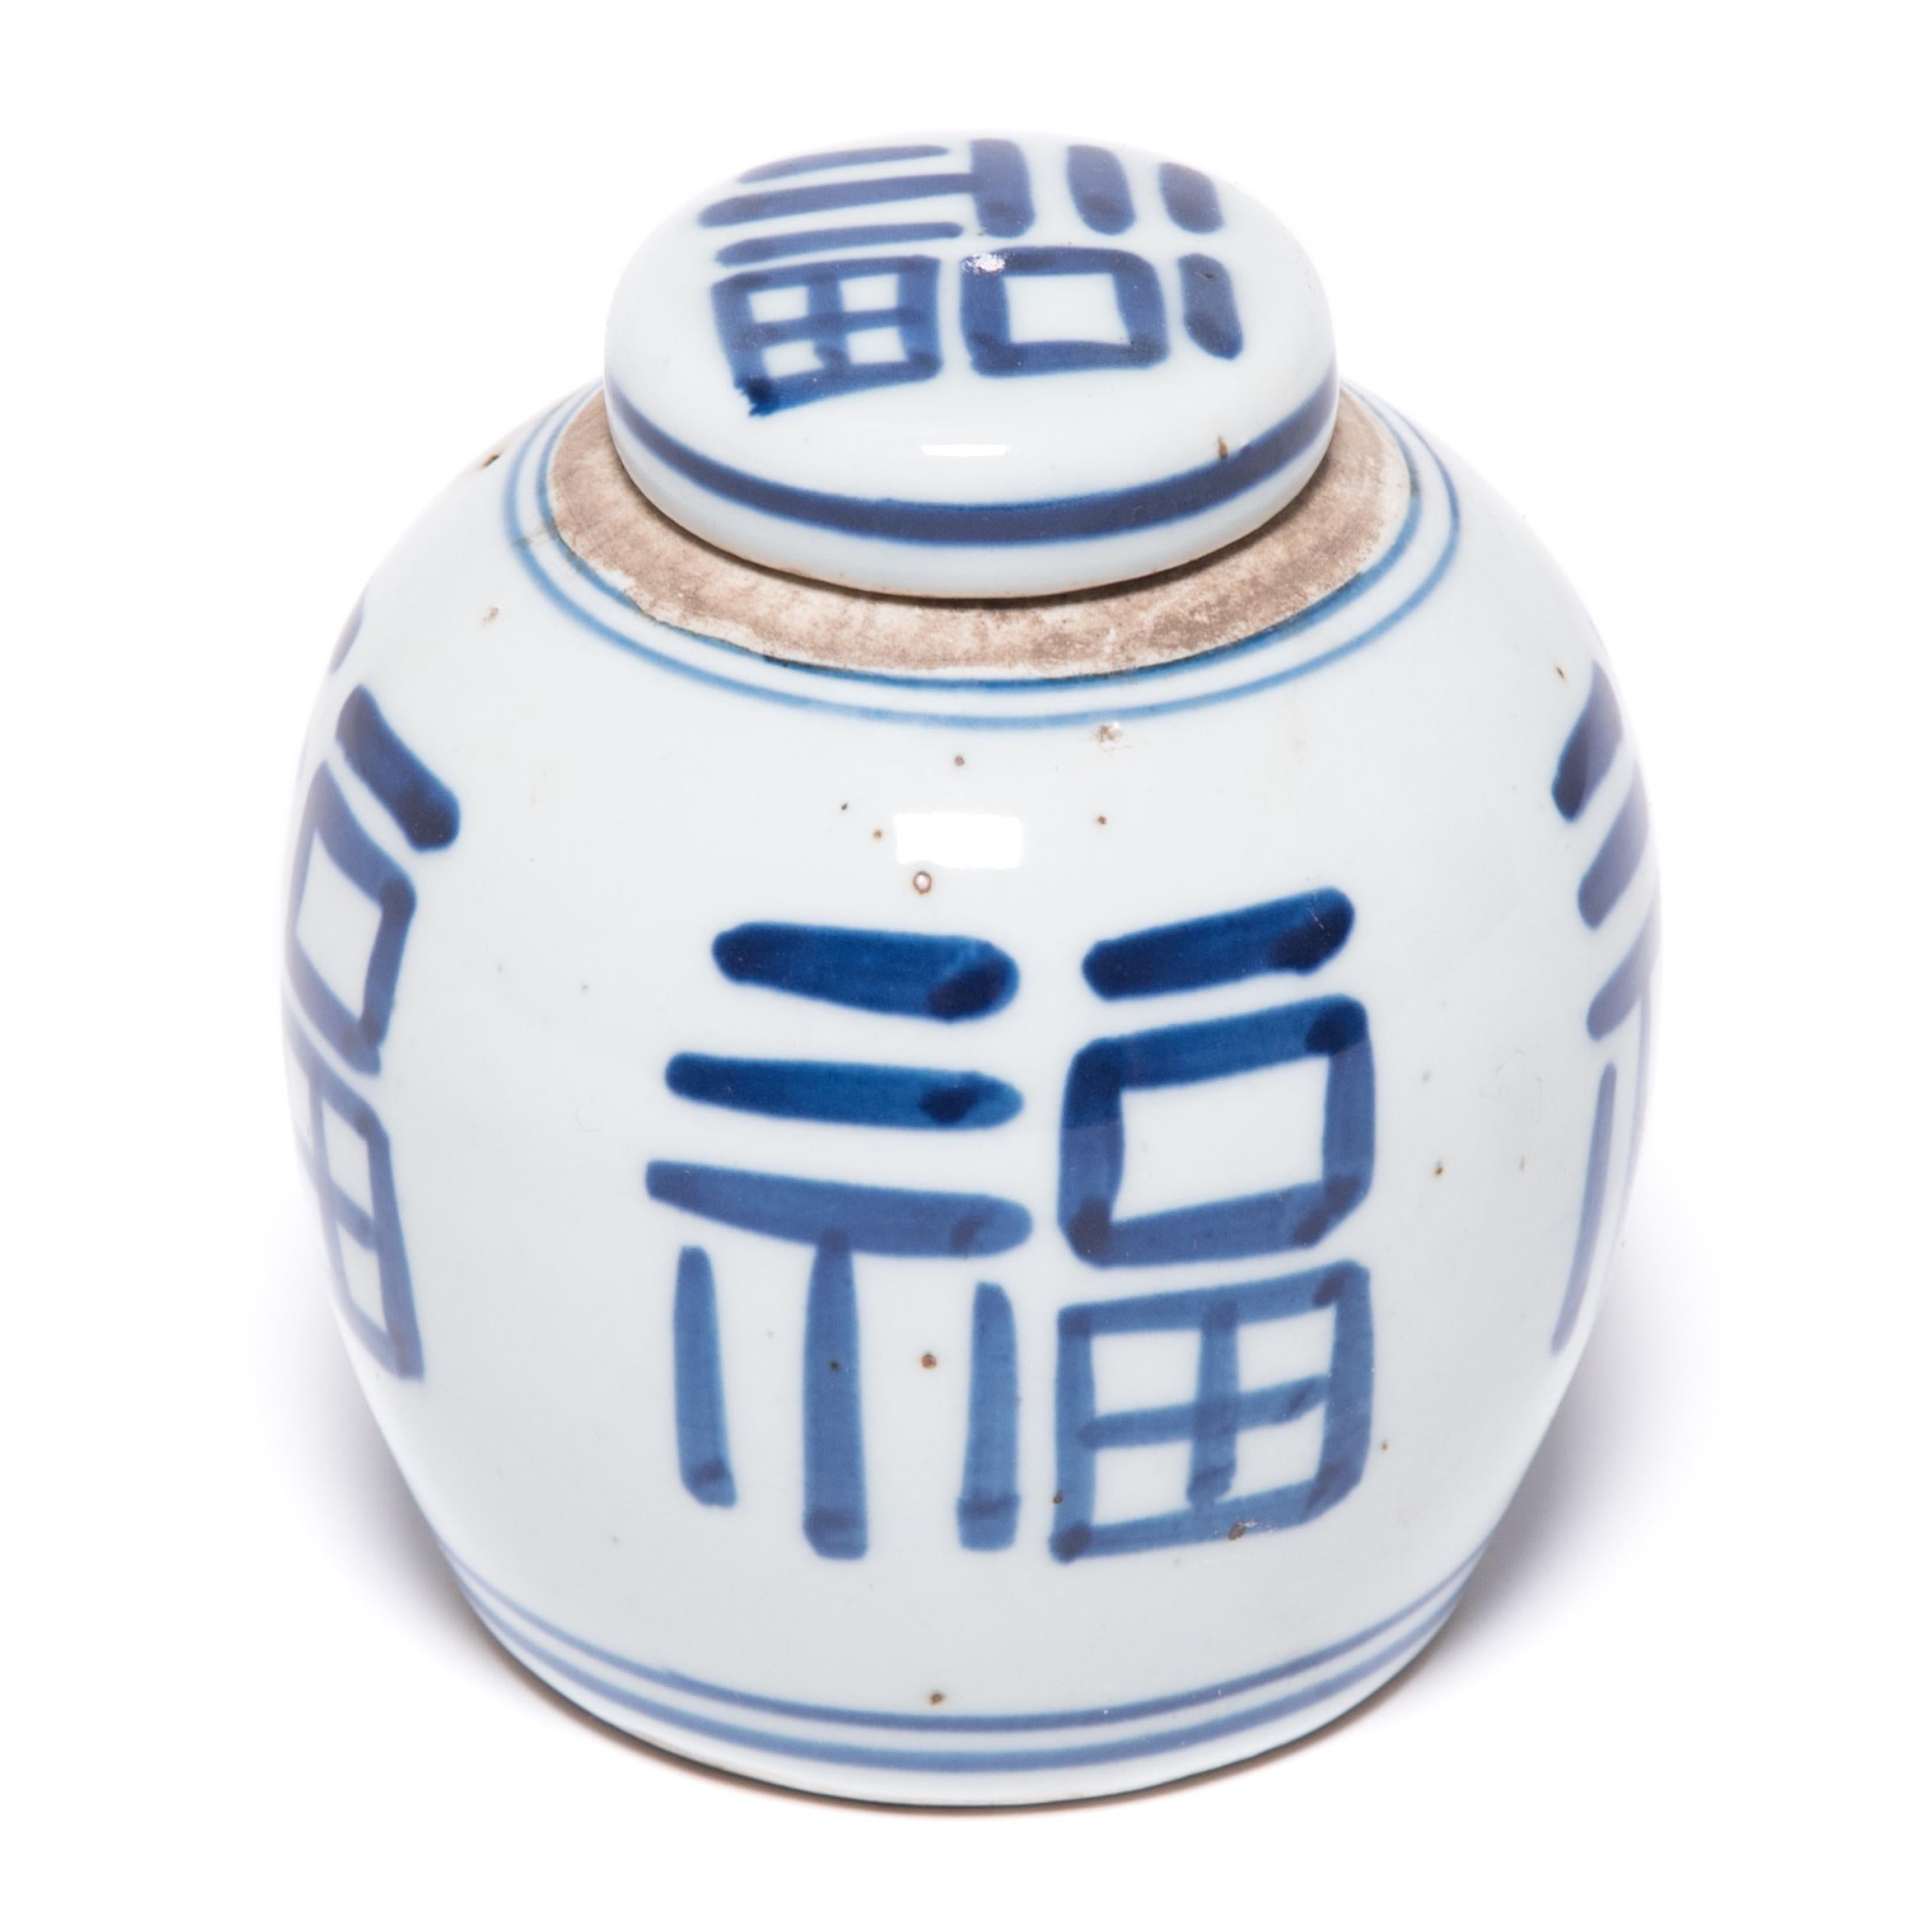 Painted in the classic blue and white manner, this petite ginger jar is marked with an abstracted version of the fu character, a symbol of prosperity and good fortune. Sculpted at the turn of the 20th century, this jar has a clean design and graphic